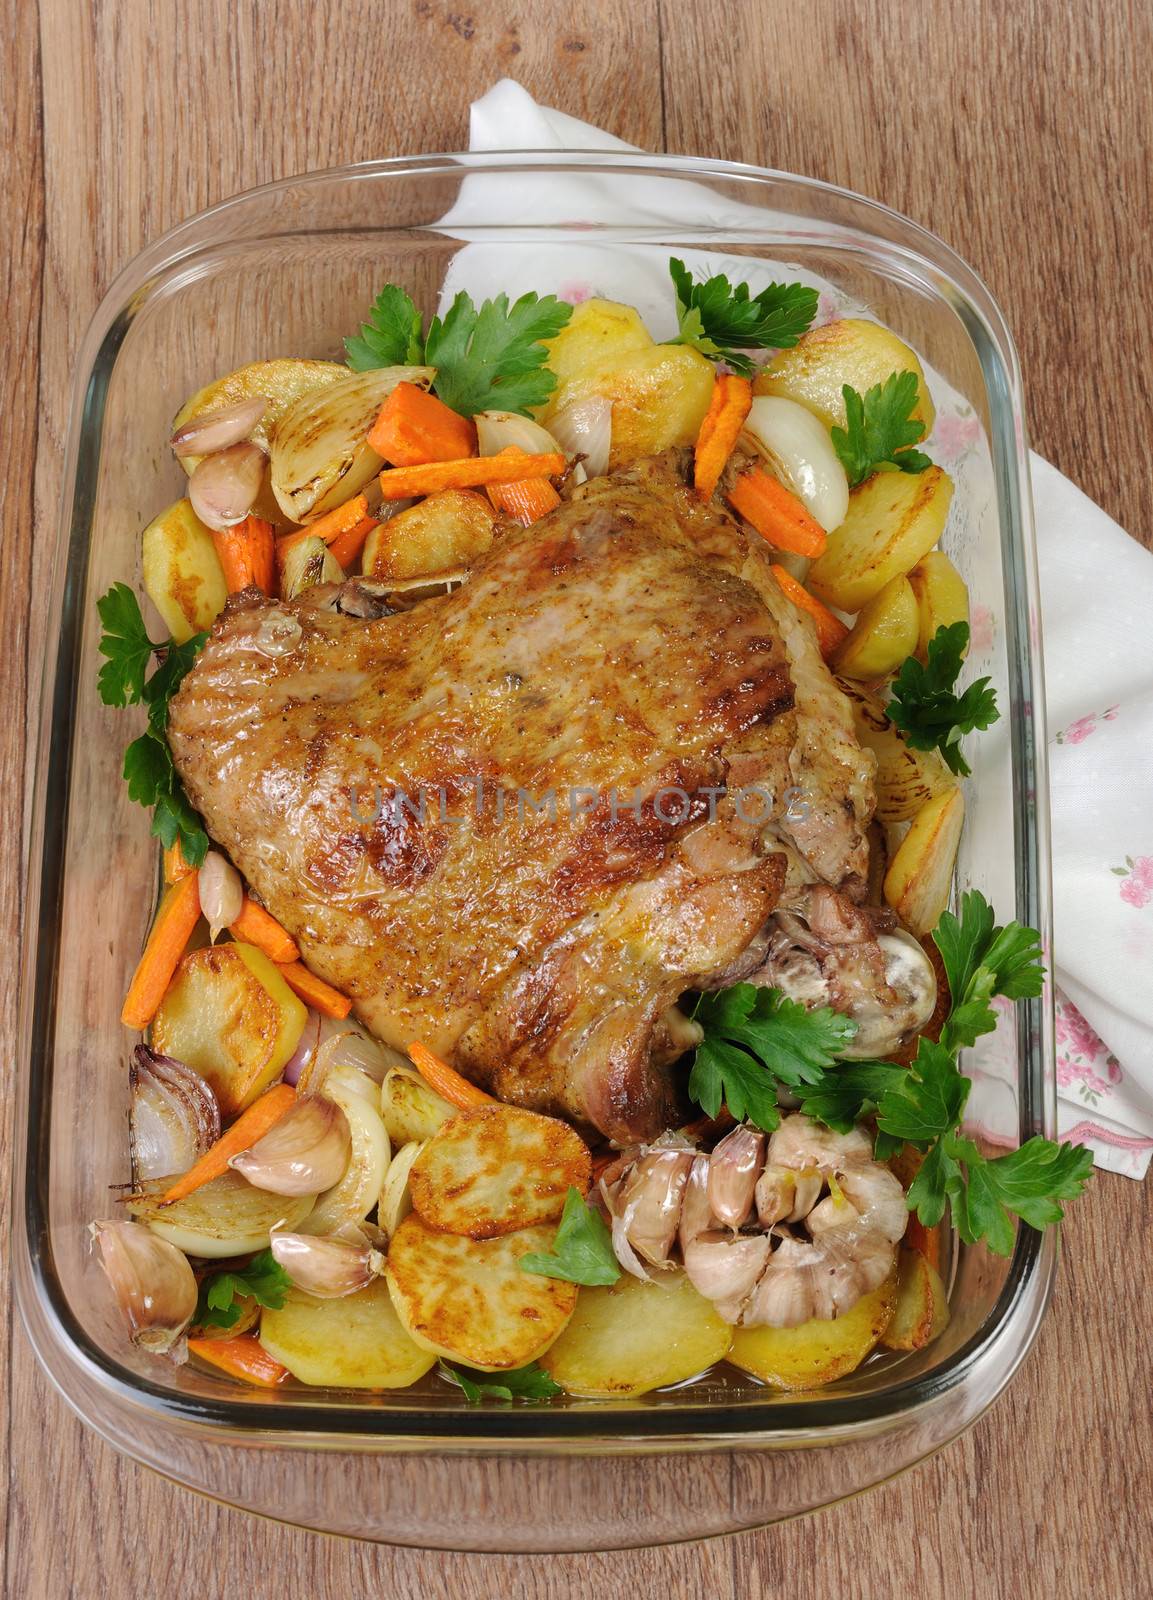 Turkey thigh baked with vegetables by Apolonia